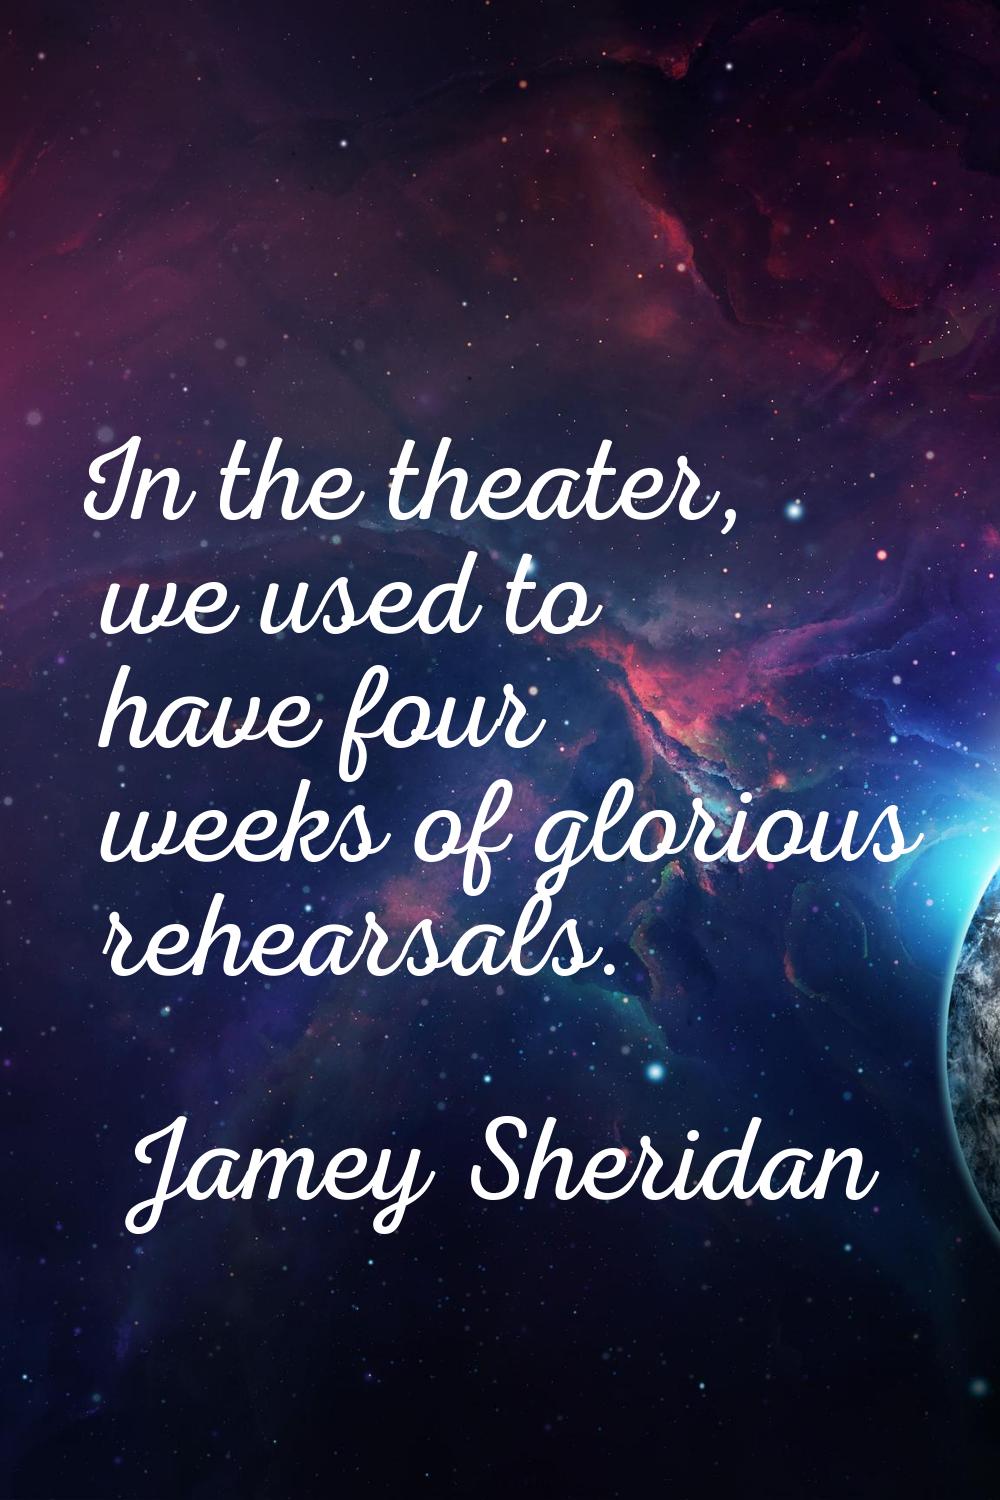 In the theater, we used to have four weeks of glorious rehearsals.